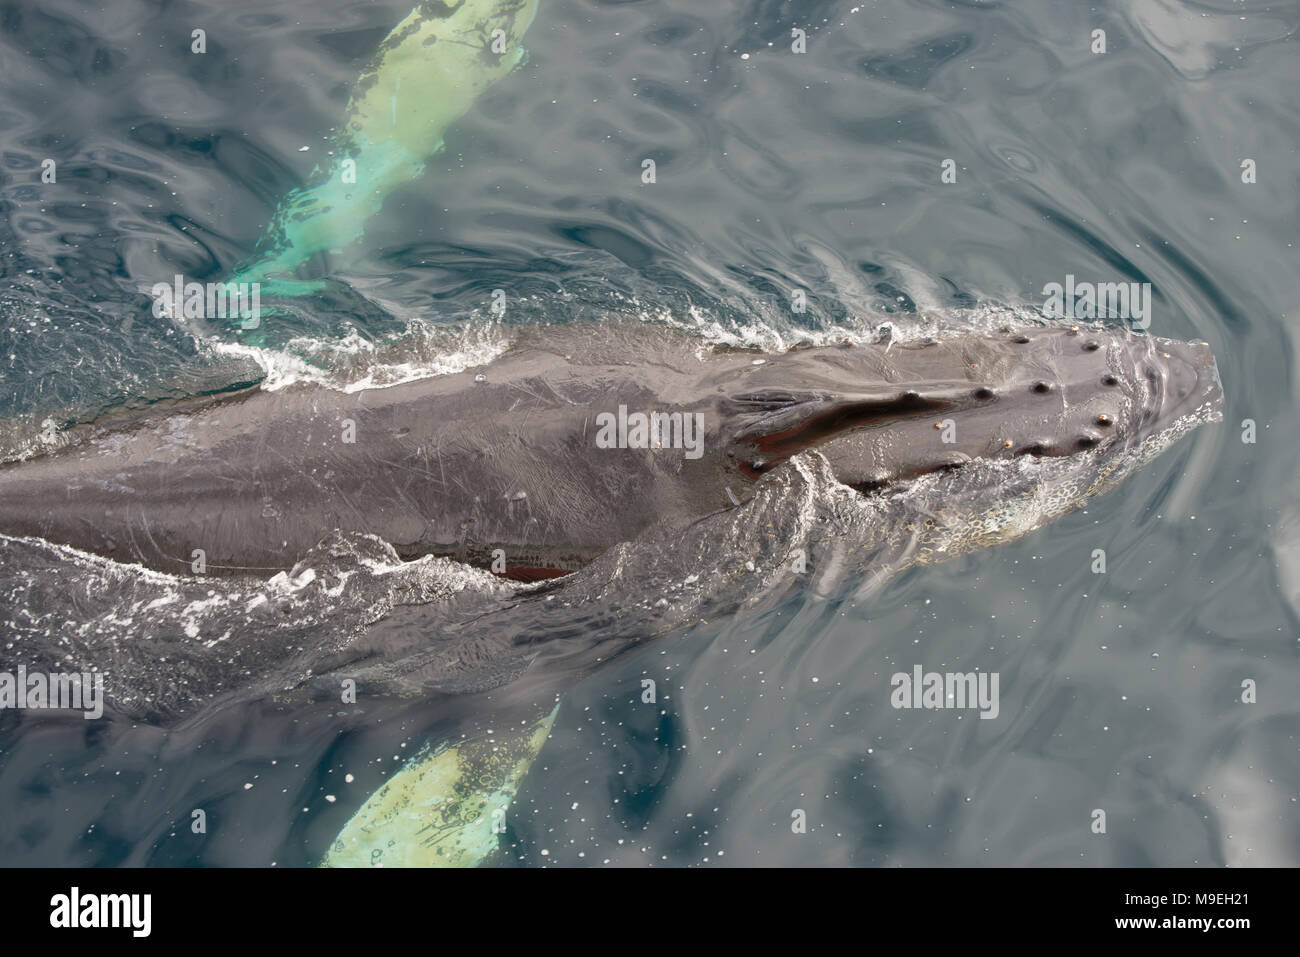 A Humpback Whale (Megaptera novaeangliae) very close to the surface in Antarctica Stock Photo